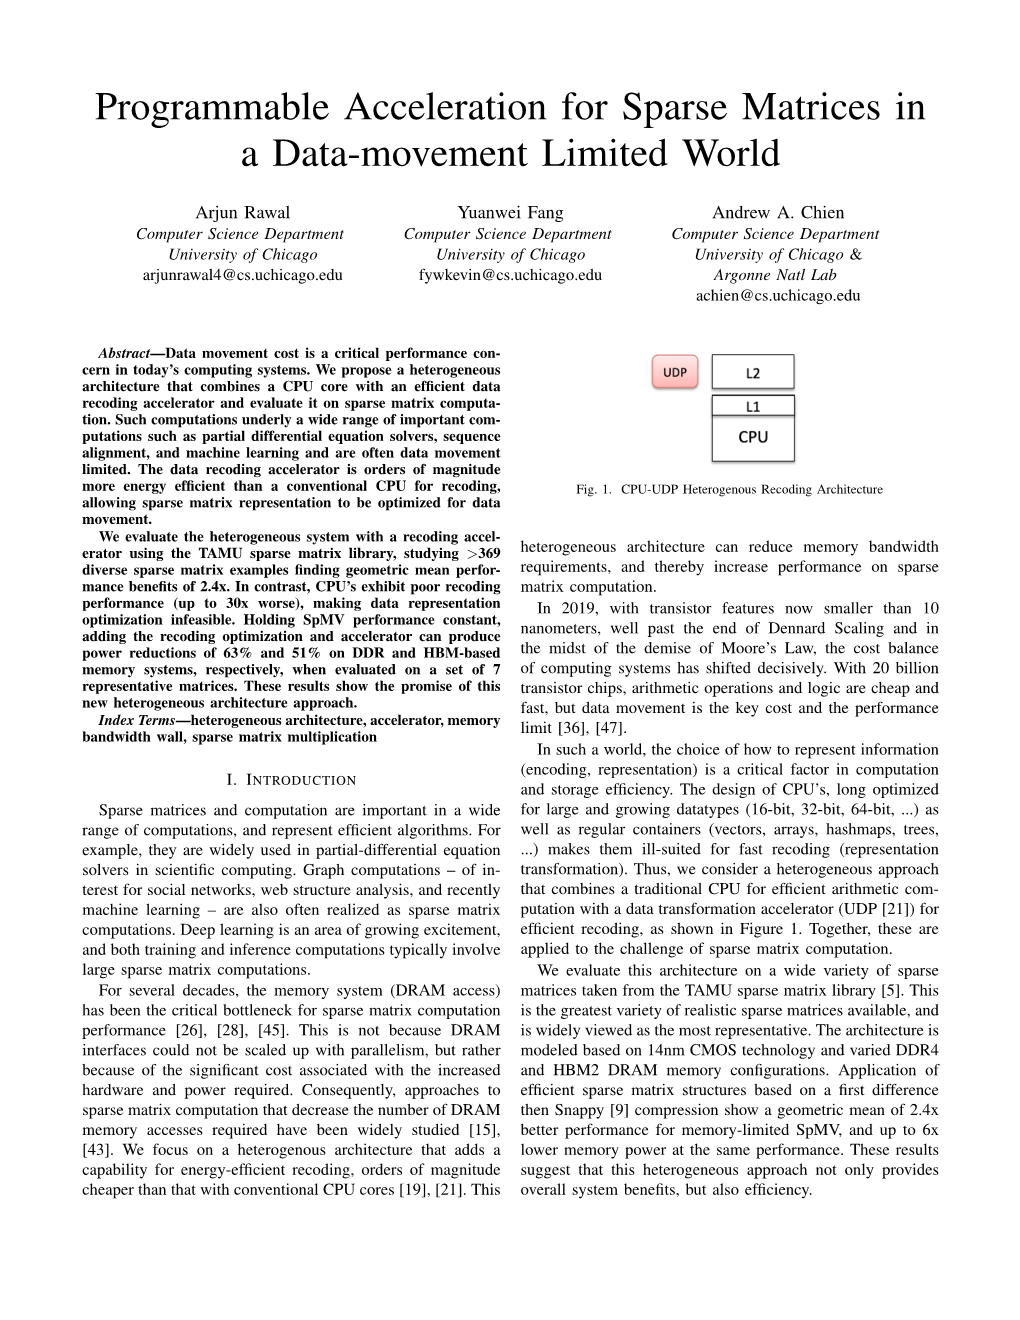 Programmable Acceleration for Sparse Matrices in a Data-Movement Limited World